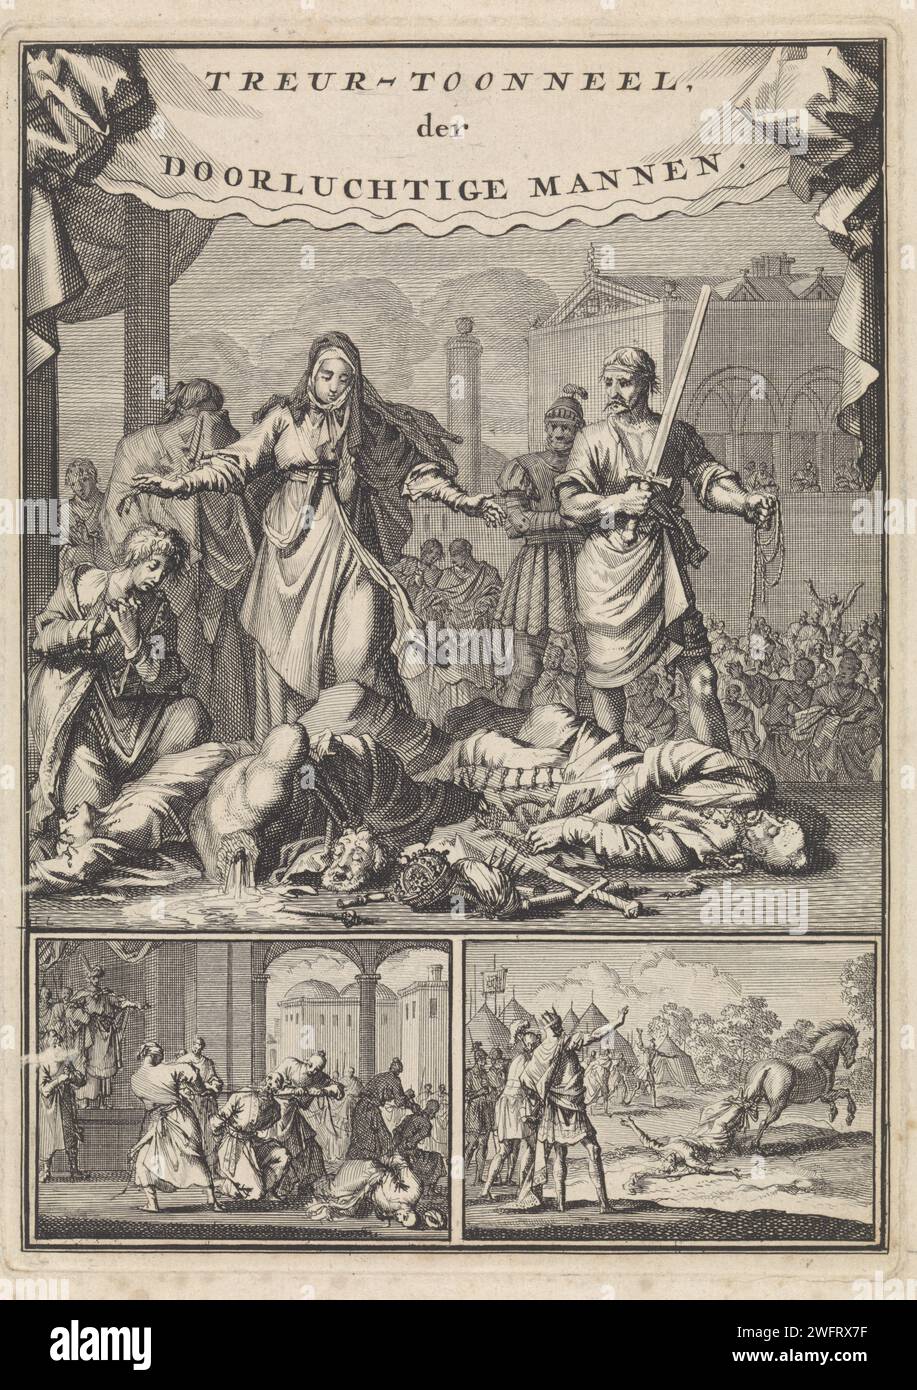 Faithfulness, mercy and love see three figures put to death, Jan Luyken, 1698 print The personifications of faith, mercy and love see a strangled Turk, a decapitated prince and a third party to death figure. On the right the executioner with sword and strangulation. Two small scenes in which figures are deprived of their lives under this main performance. Amsterdam paper etching Fidelity; 'Faithful (Ripa). Mercy, Compassion; 'Compassion', 'Mercy' (Ripa). Friendliness, gentleness, affabilities; 'Affability, pleasantness, amiability', 'pleasant soul, negotiable & loving', 'benignity' (Ripa). Dea Stock Photo